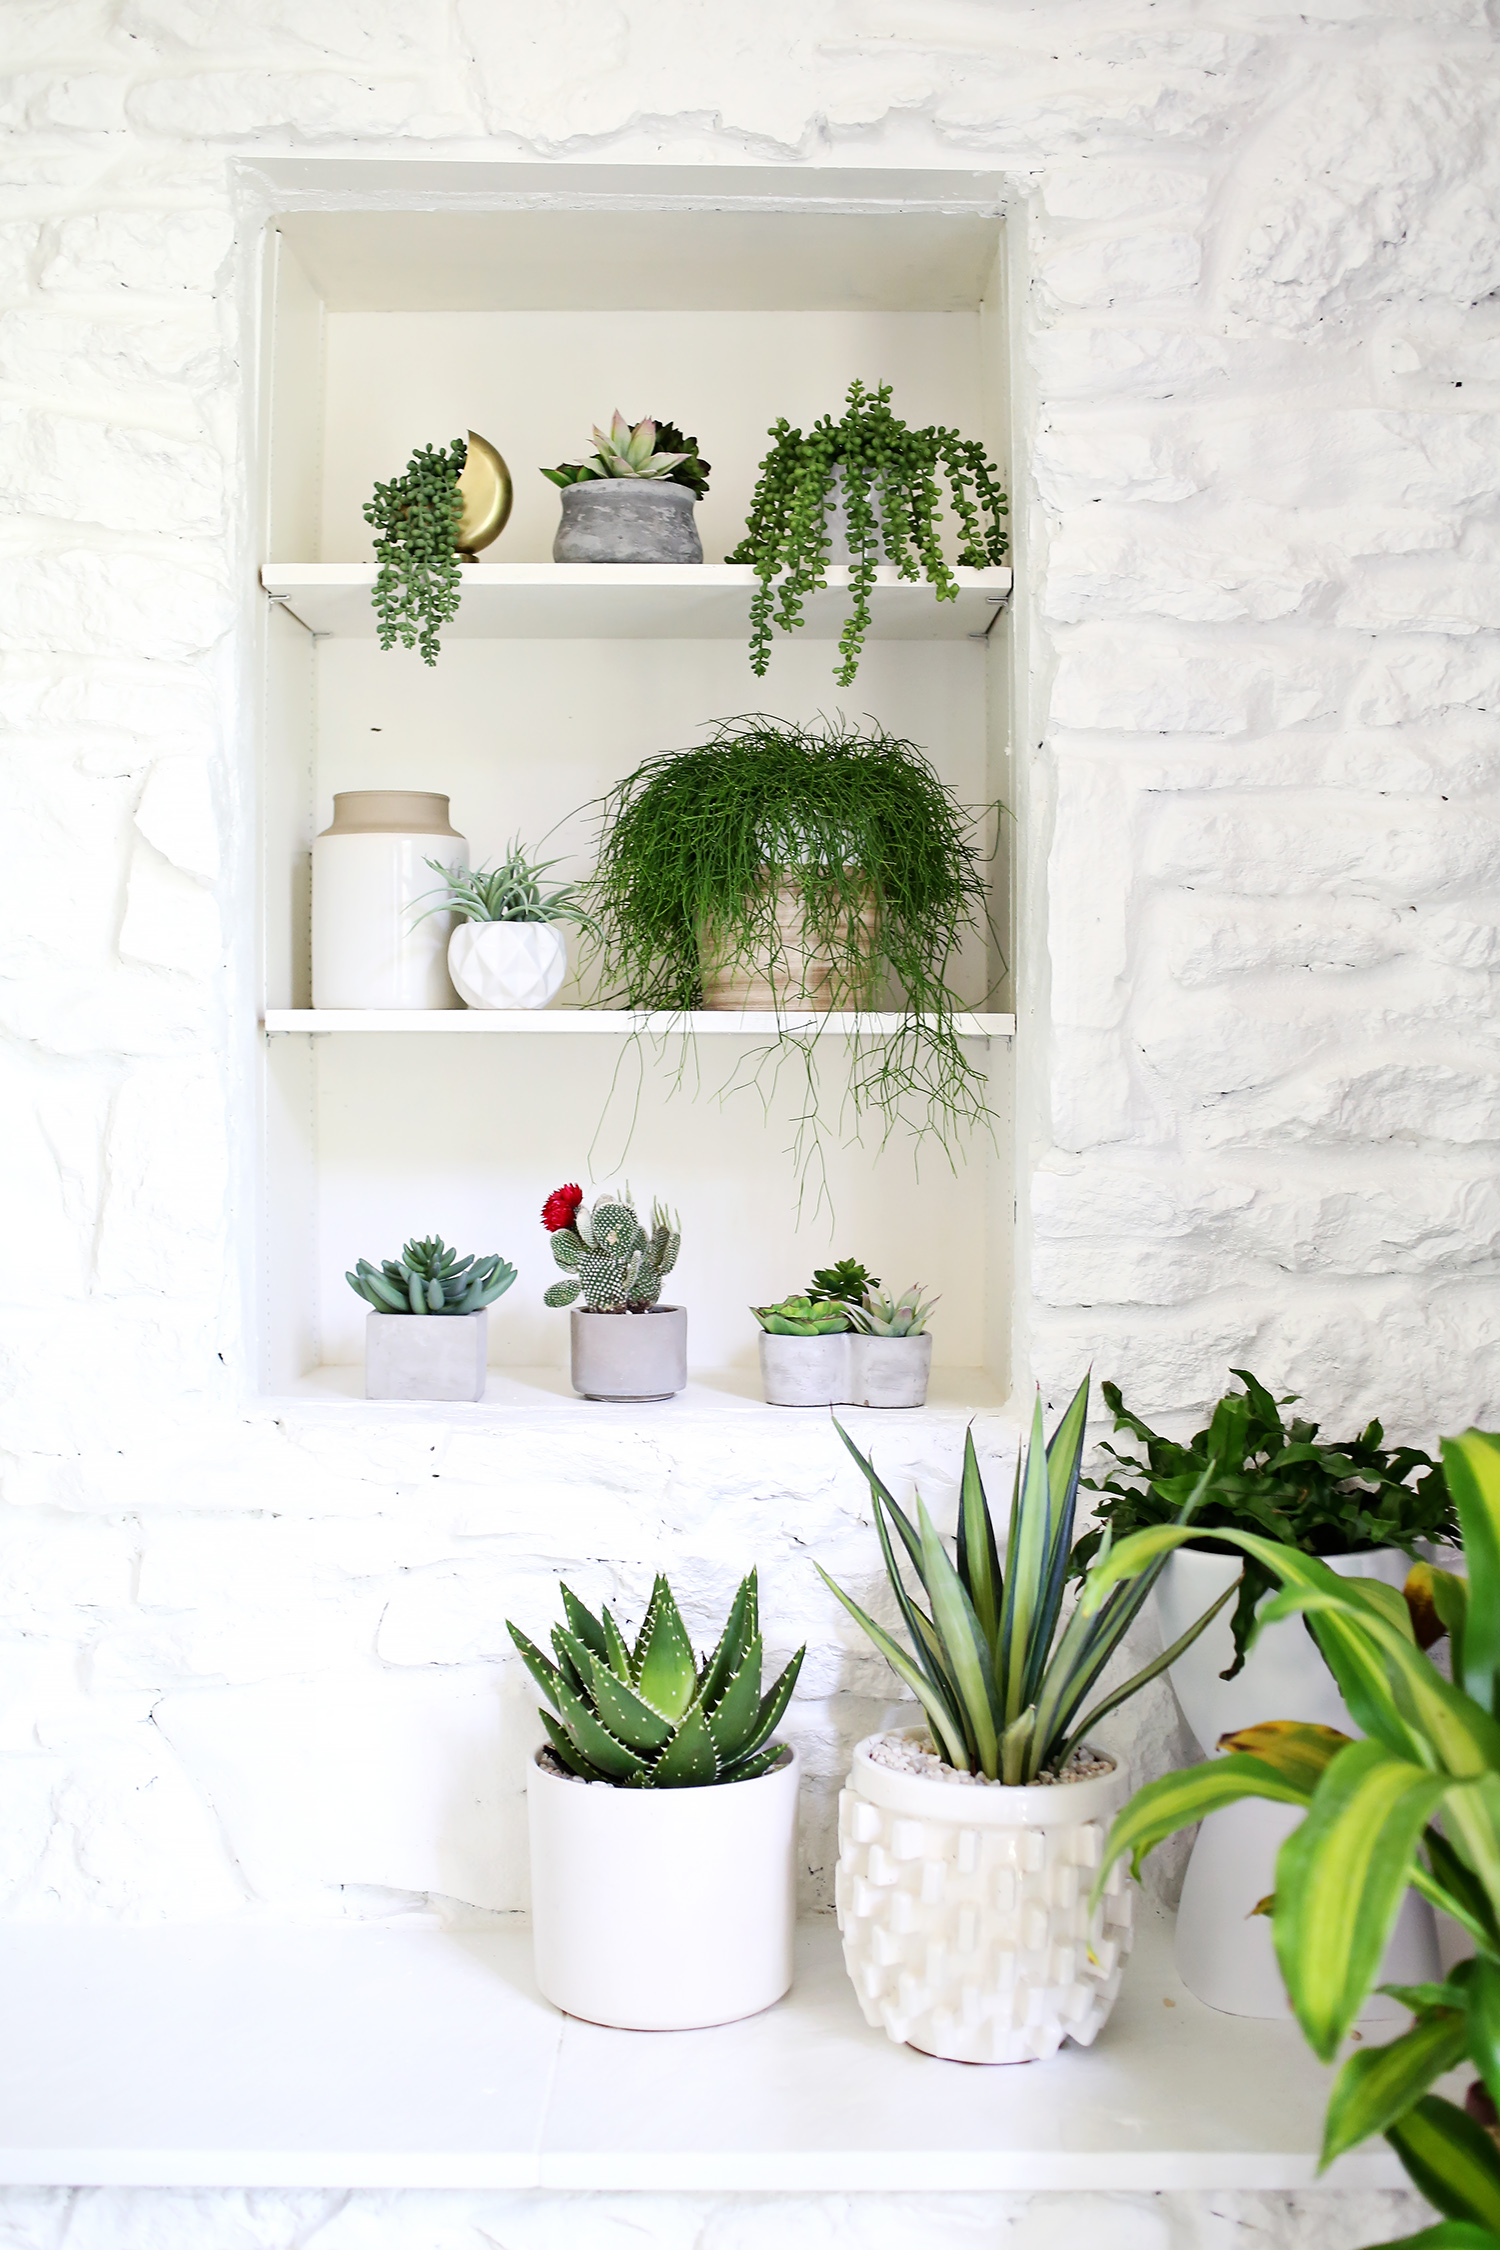 Are you faux real? (How to find convincing fake plants) 